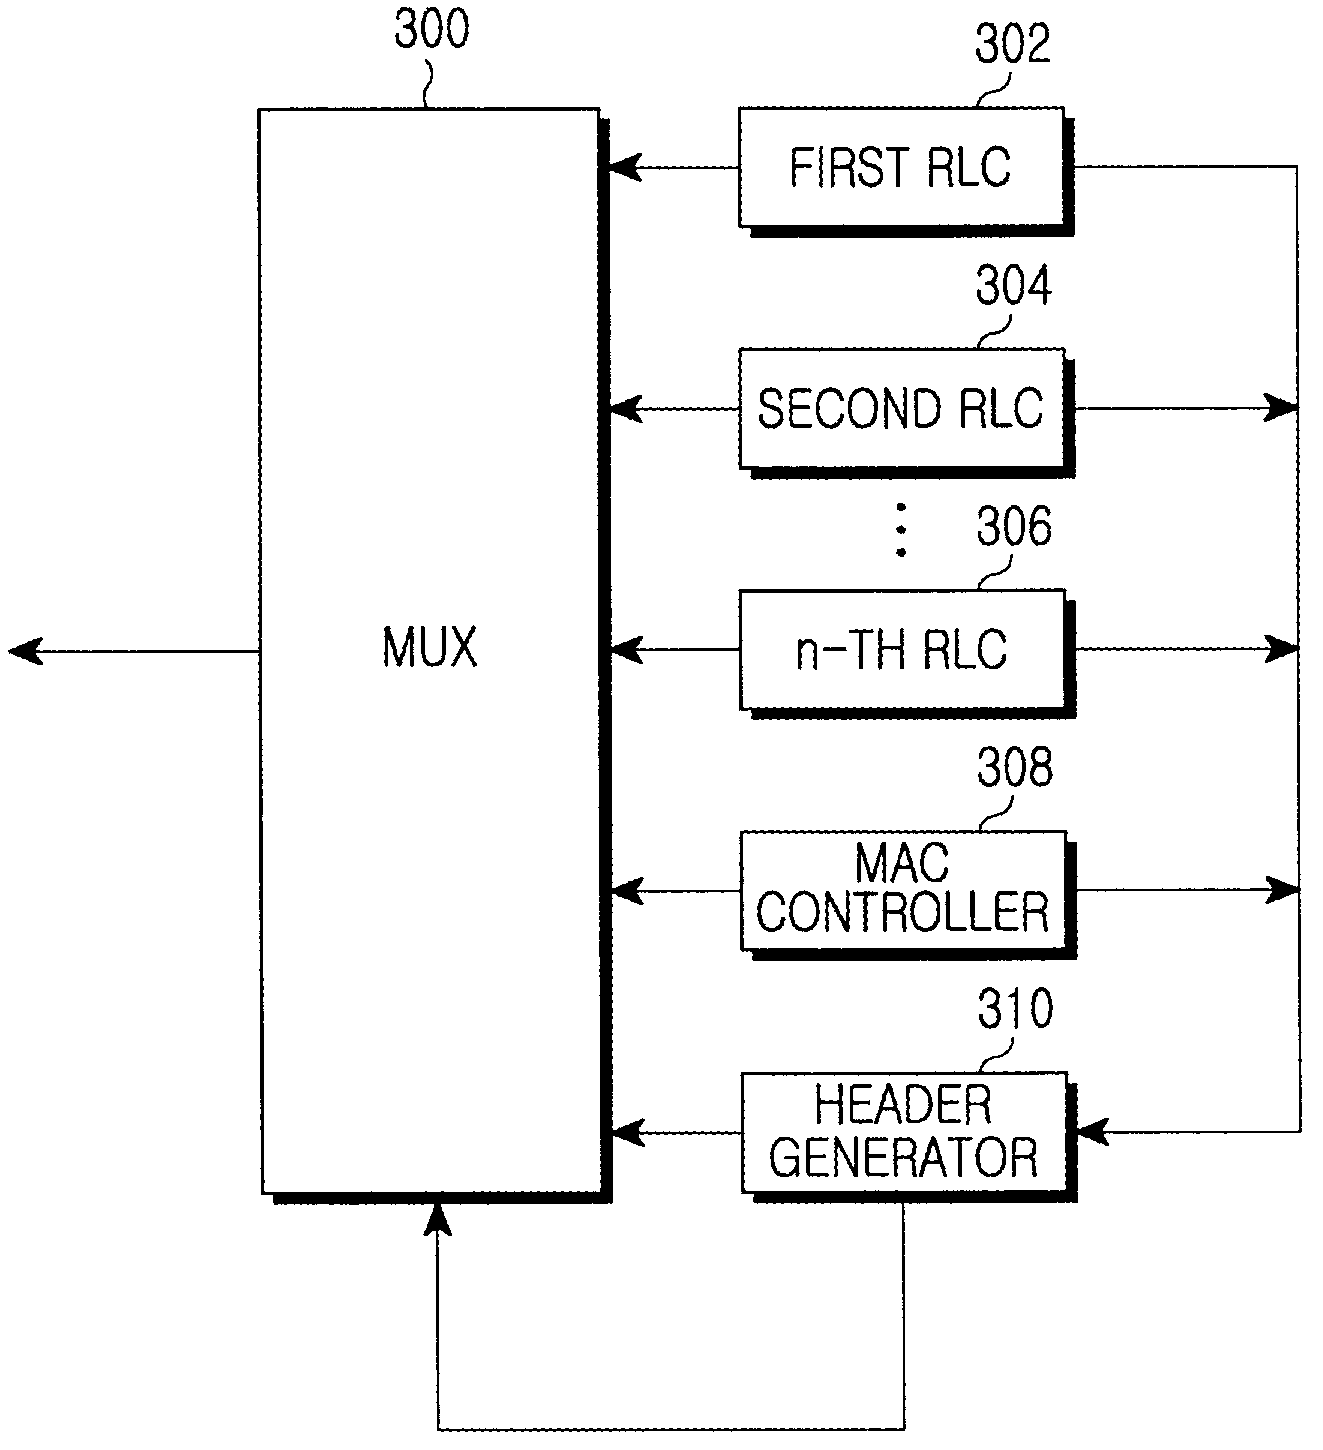 Apparatus and method for generating and parsing MAC PDU in a mobile communication system